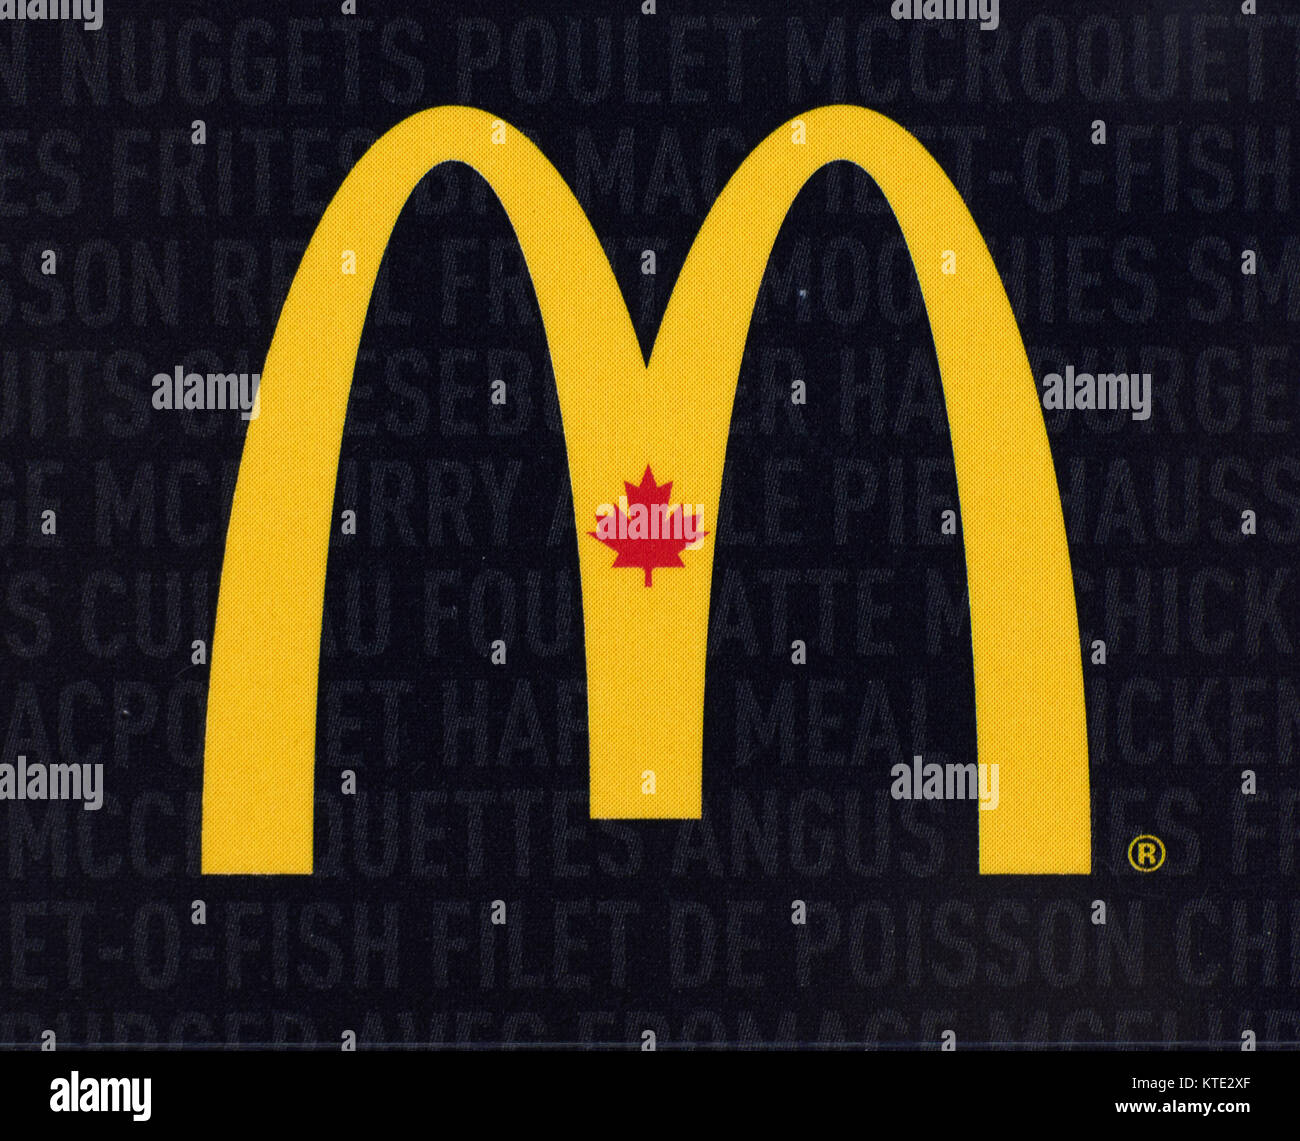 MONTREAL, CANADA - JULY 30, 2017 : Mcdonalds Canada logo printed on a paper Stock Photo